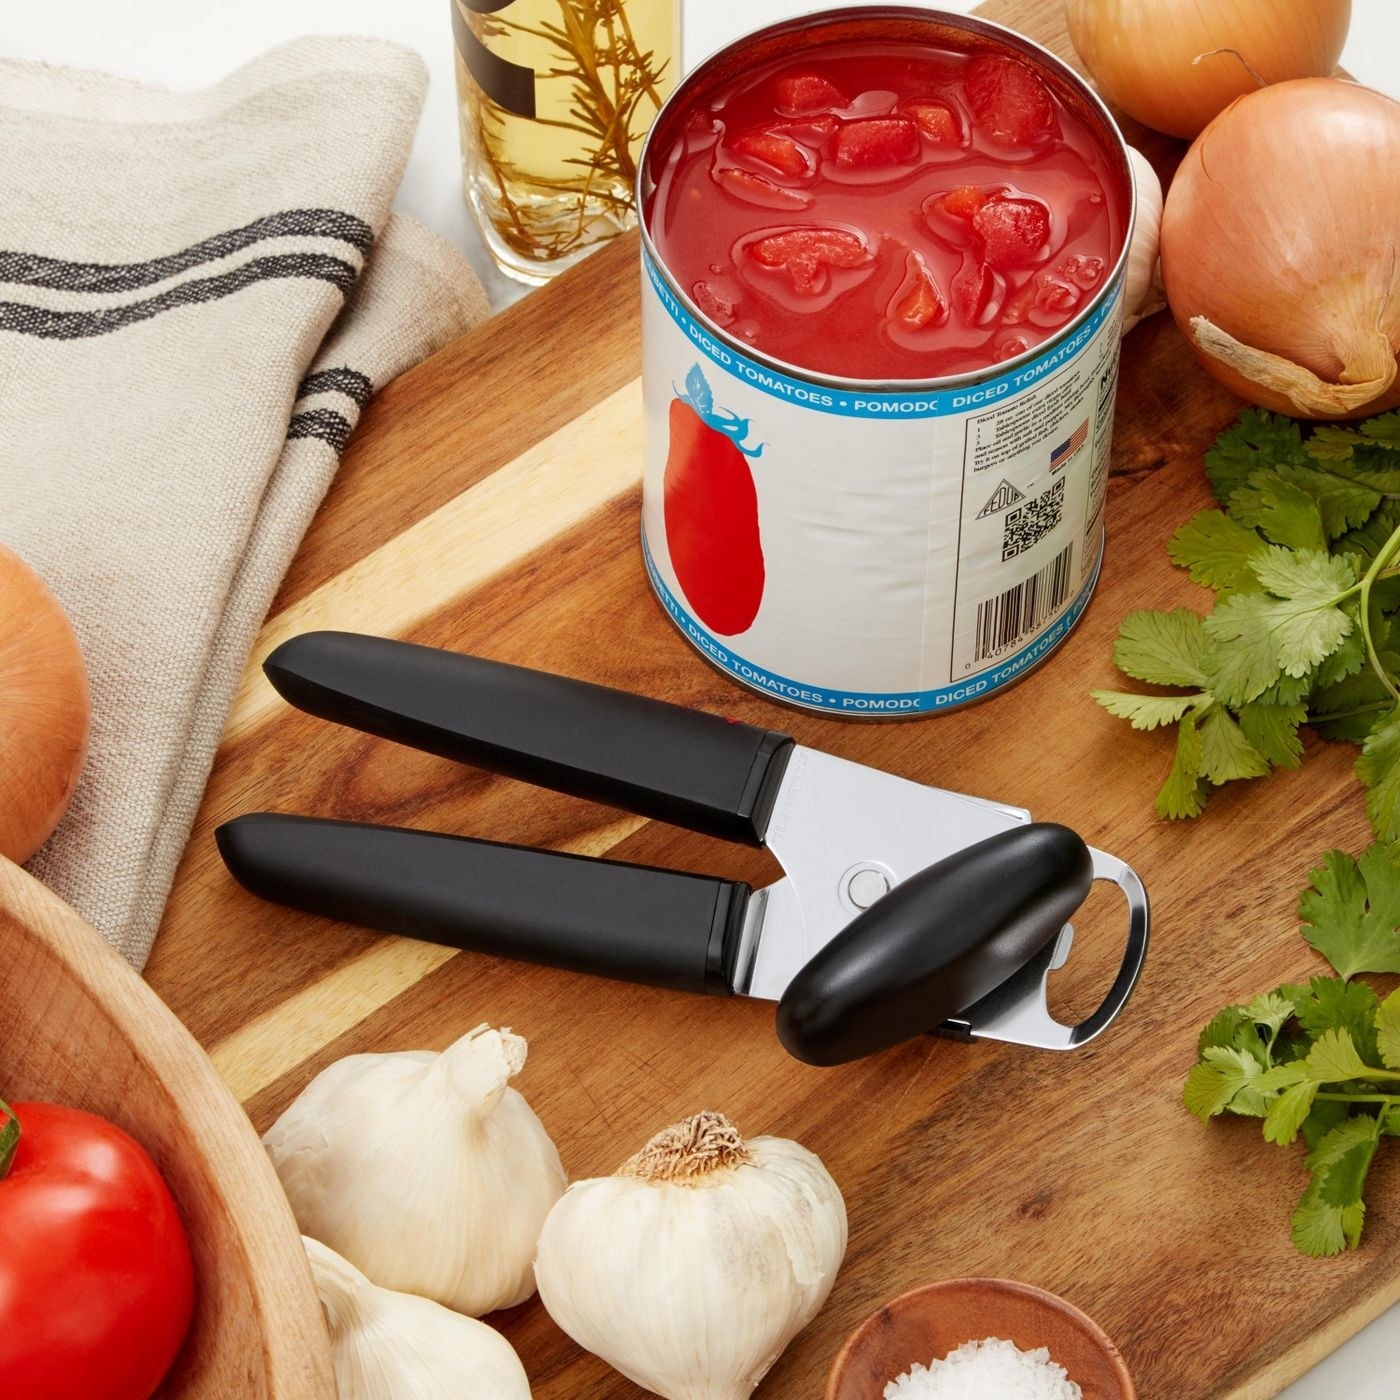 stainless steel can opener with black handles next to an open can of tomatoes